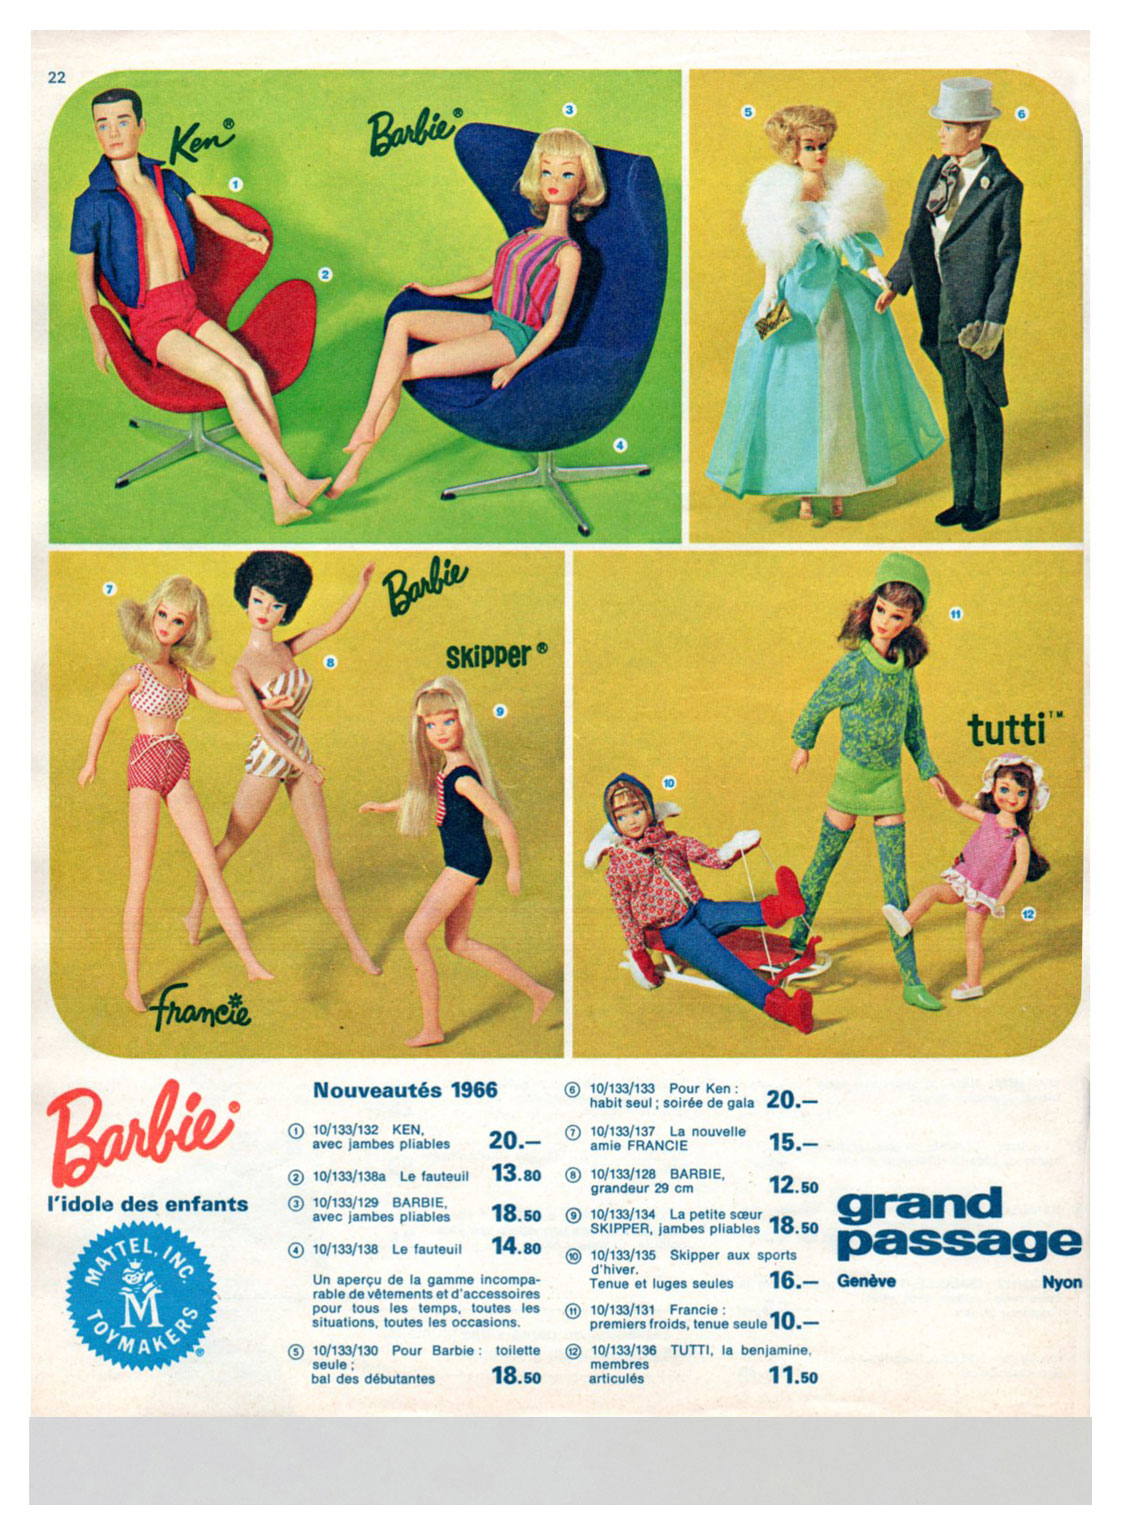 From 1966 Swiss Grand Passage department store catalogue